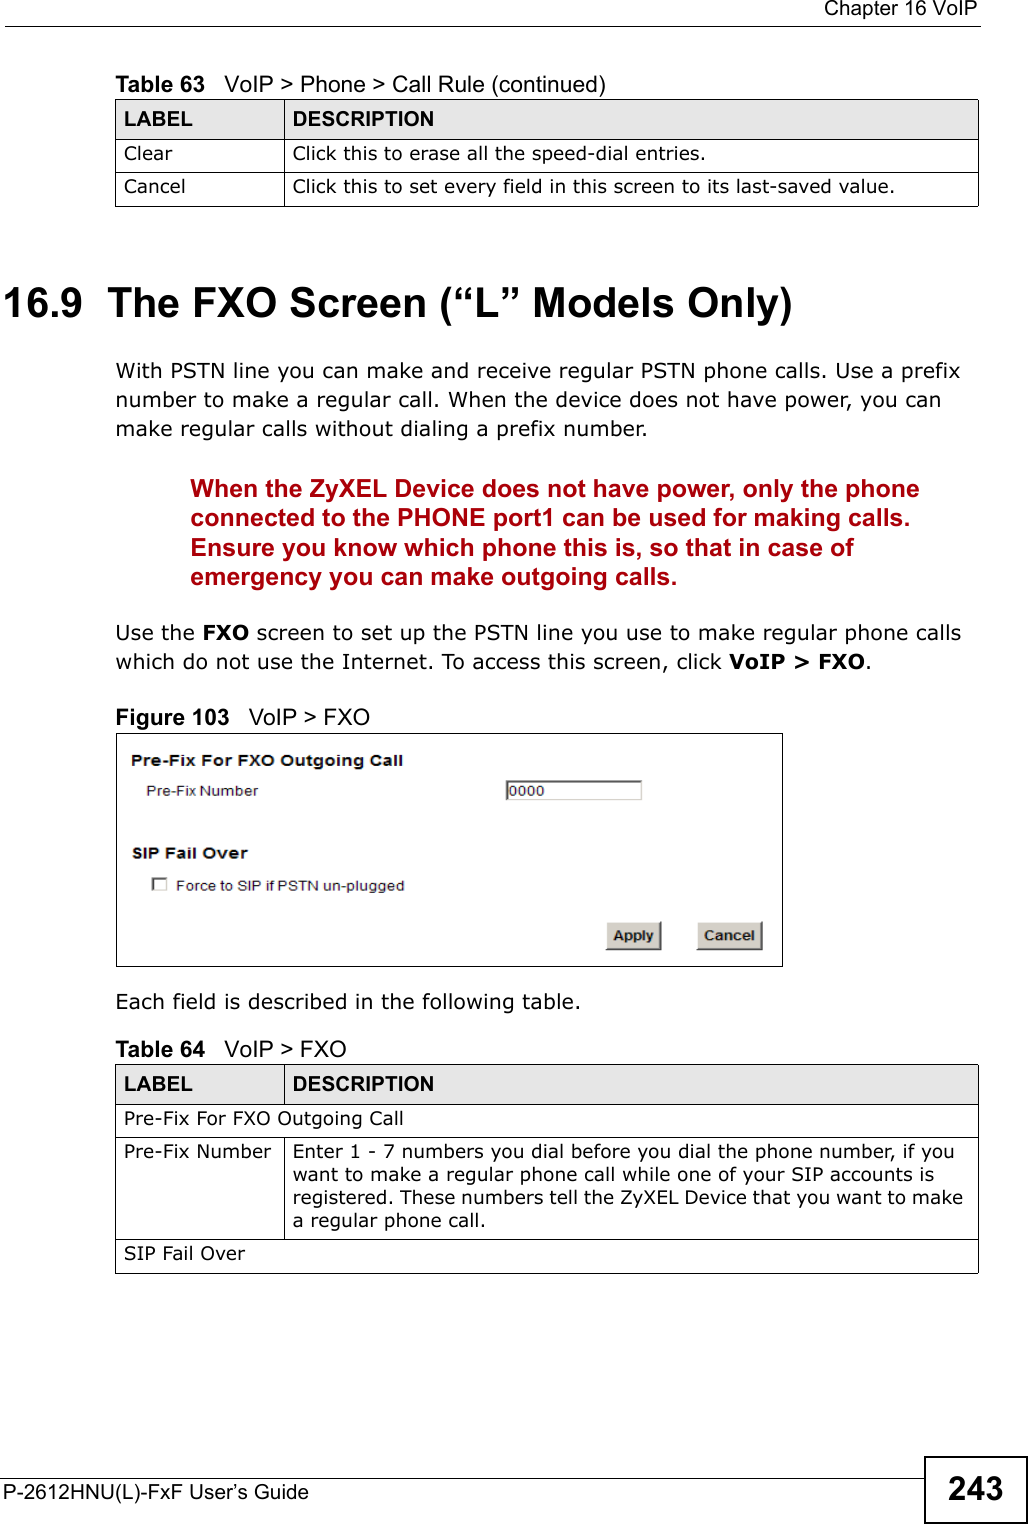  Chapter 16 VoIPP-2612HNU(L)-FxF User’s Guide 24316.9  The FXO Screen (“L” Models Only)With PSTN line you can make and receive regular PSTN phone calls. Use a prefix number to make a regular call. When the device does not have power, you can make regular calls without dialing a prefix number.When the ZyXEL Device does not have power, only the phone connected to the PHONE port1 can be used for making calls. Ensure you know which phone this is, so that in case of emergency you can make outgoing calls. Use the FXO screen to set up the PSTN line you use to make regular phone calls which do not use the Internet. To access this screen, click VoIP &gt; FXO.Figure 103   VoIP &gt; FXOEach field is described in the following table.Clear Click this to erase all the speed-dial entries.Cancel Click this to set every field in this screen to its last-saved value.Table 63   VoIP &gt; Phone &gt; Call Rule (continued)LABEL DESCRIPTIONTable 64   VoIP &gt; FXOLABEL DESCRIPTIONPre-Fix For FXO Outgoing CallPre-Fix Number Enter 1 - 7 numbers you dial before you dial the phone number, if you want to make a regular phone call while one of your SIP accounts is registered. These numbers tell the ZyXEL Device that you want to makea regular phone call.SIP Fail Over